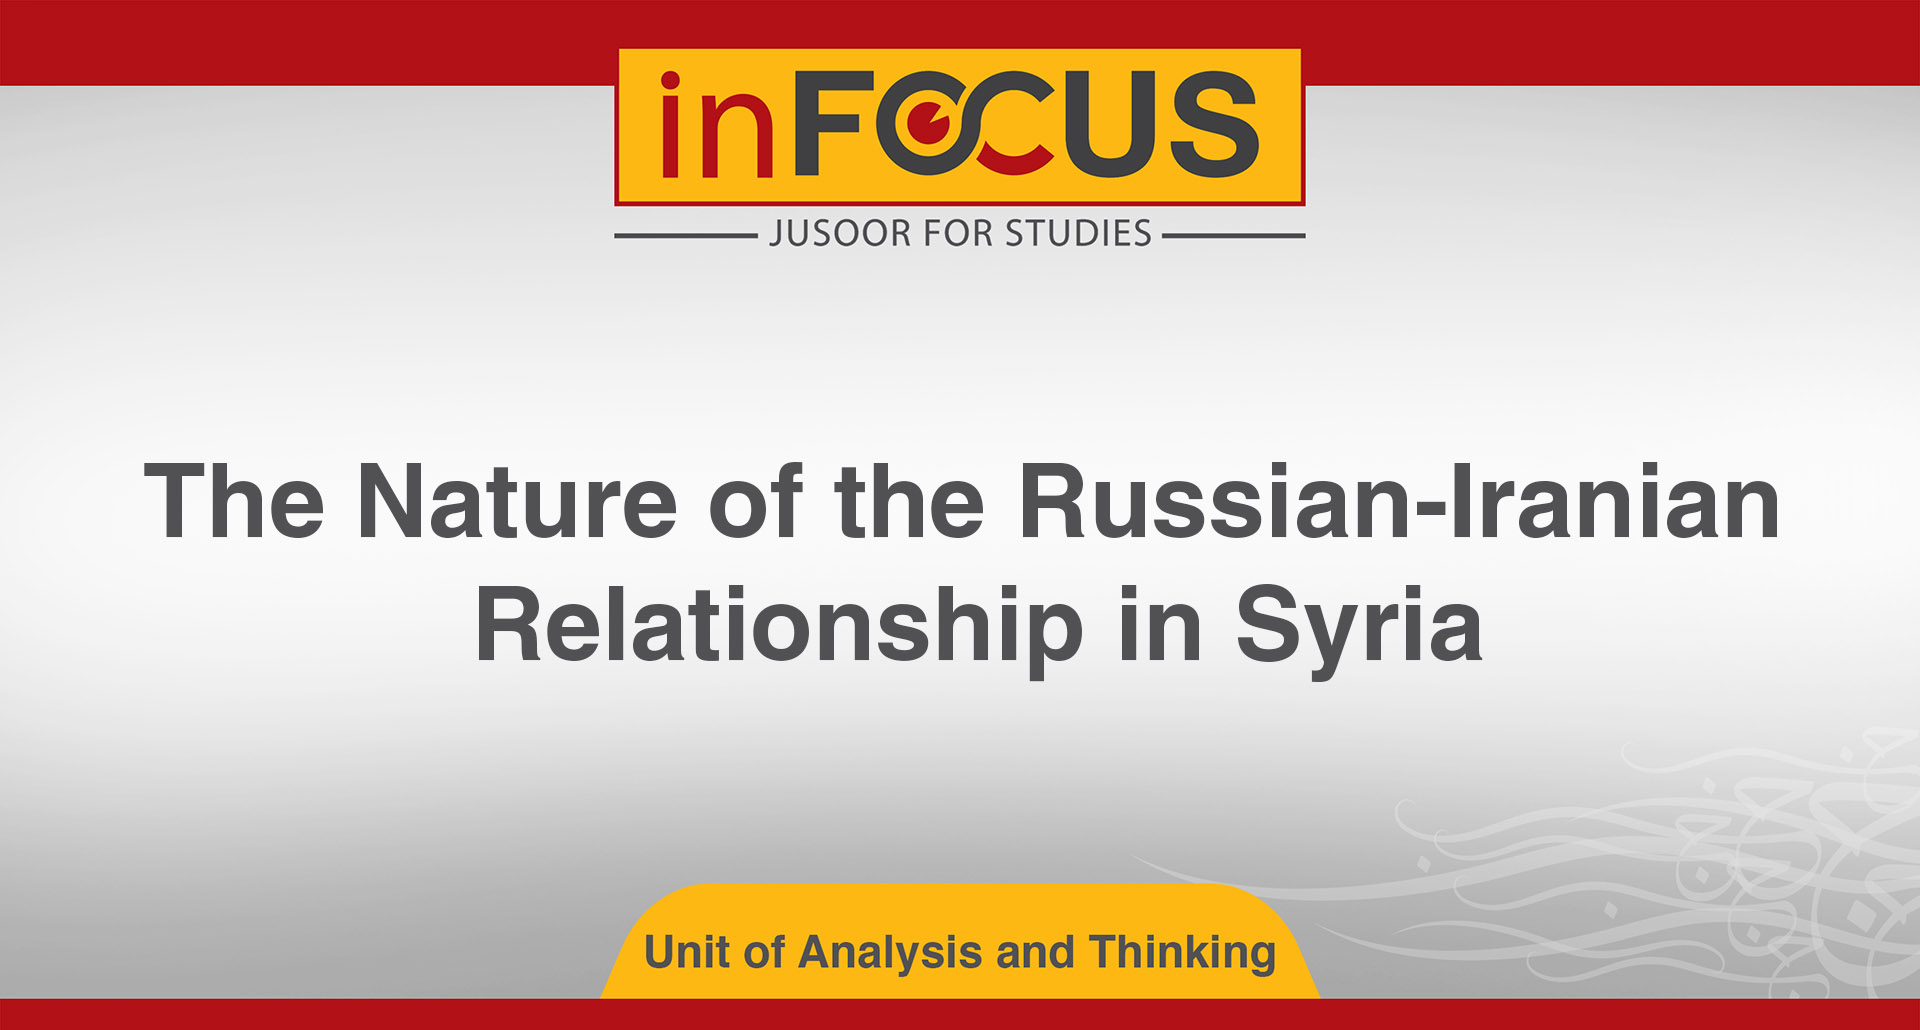 The Nature of the Russian-Iranian Relationship in Syria